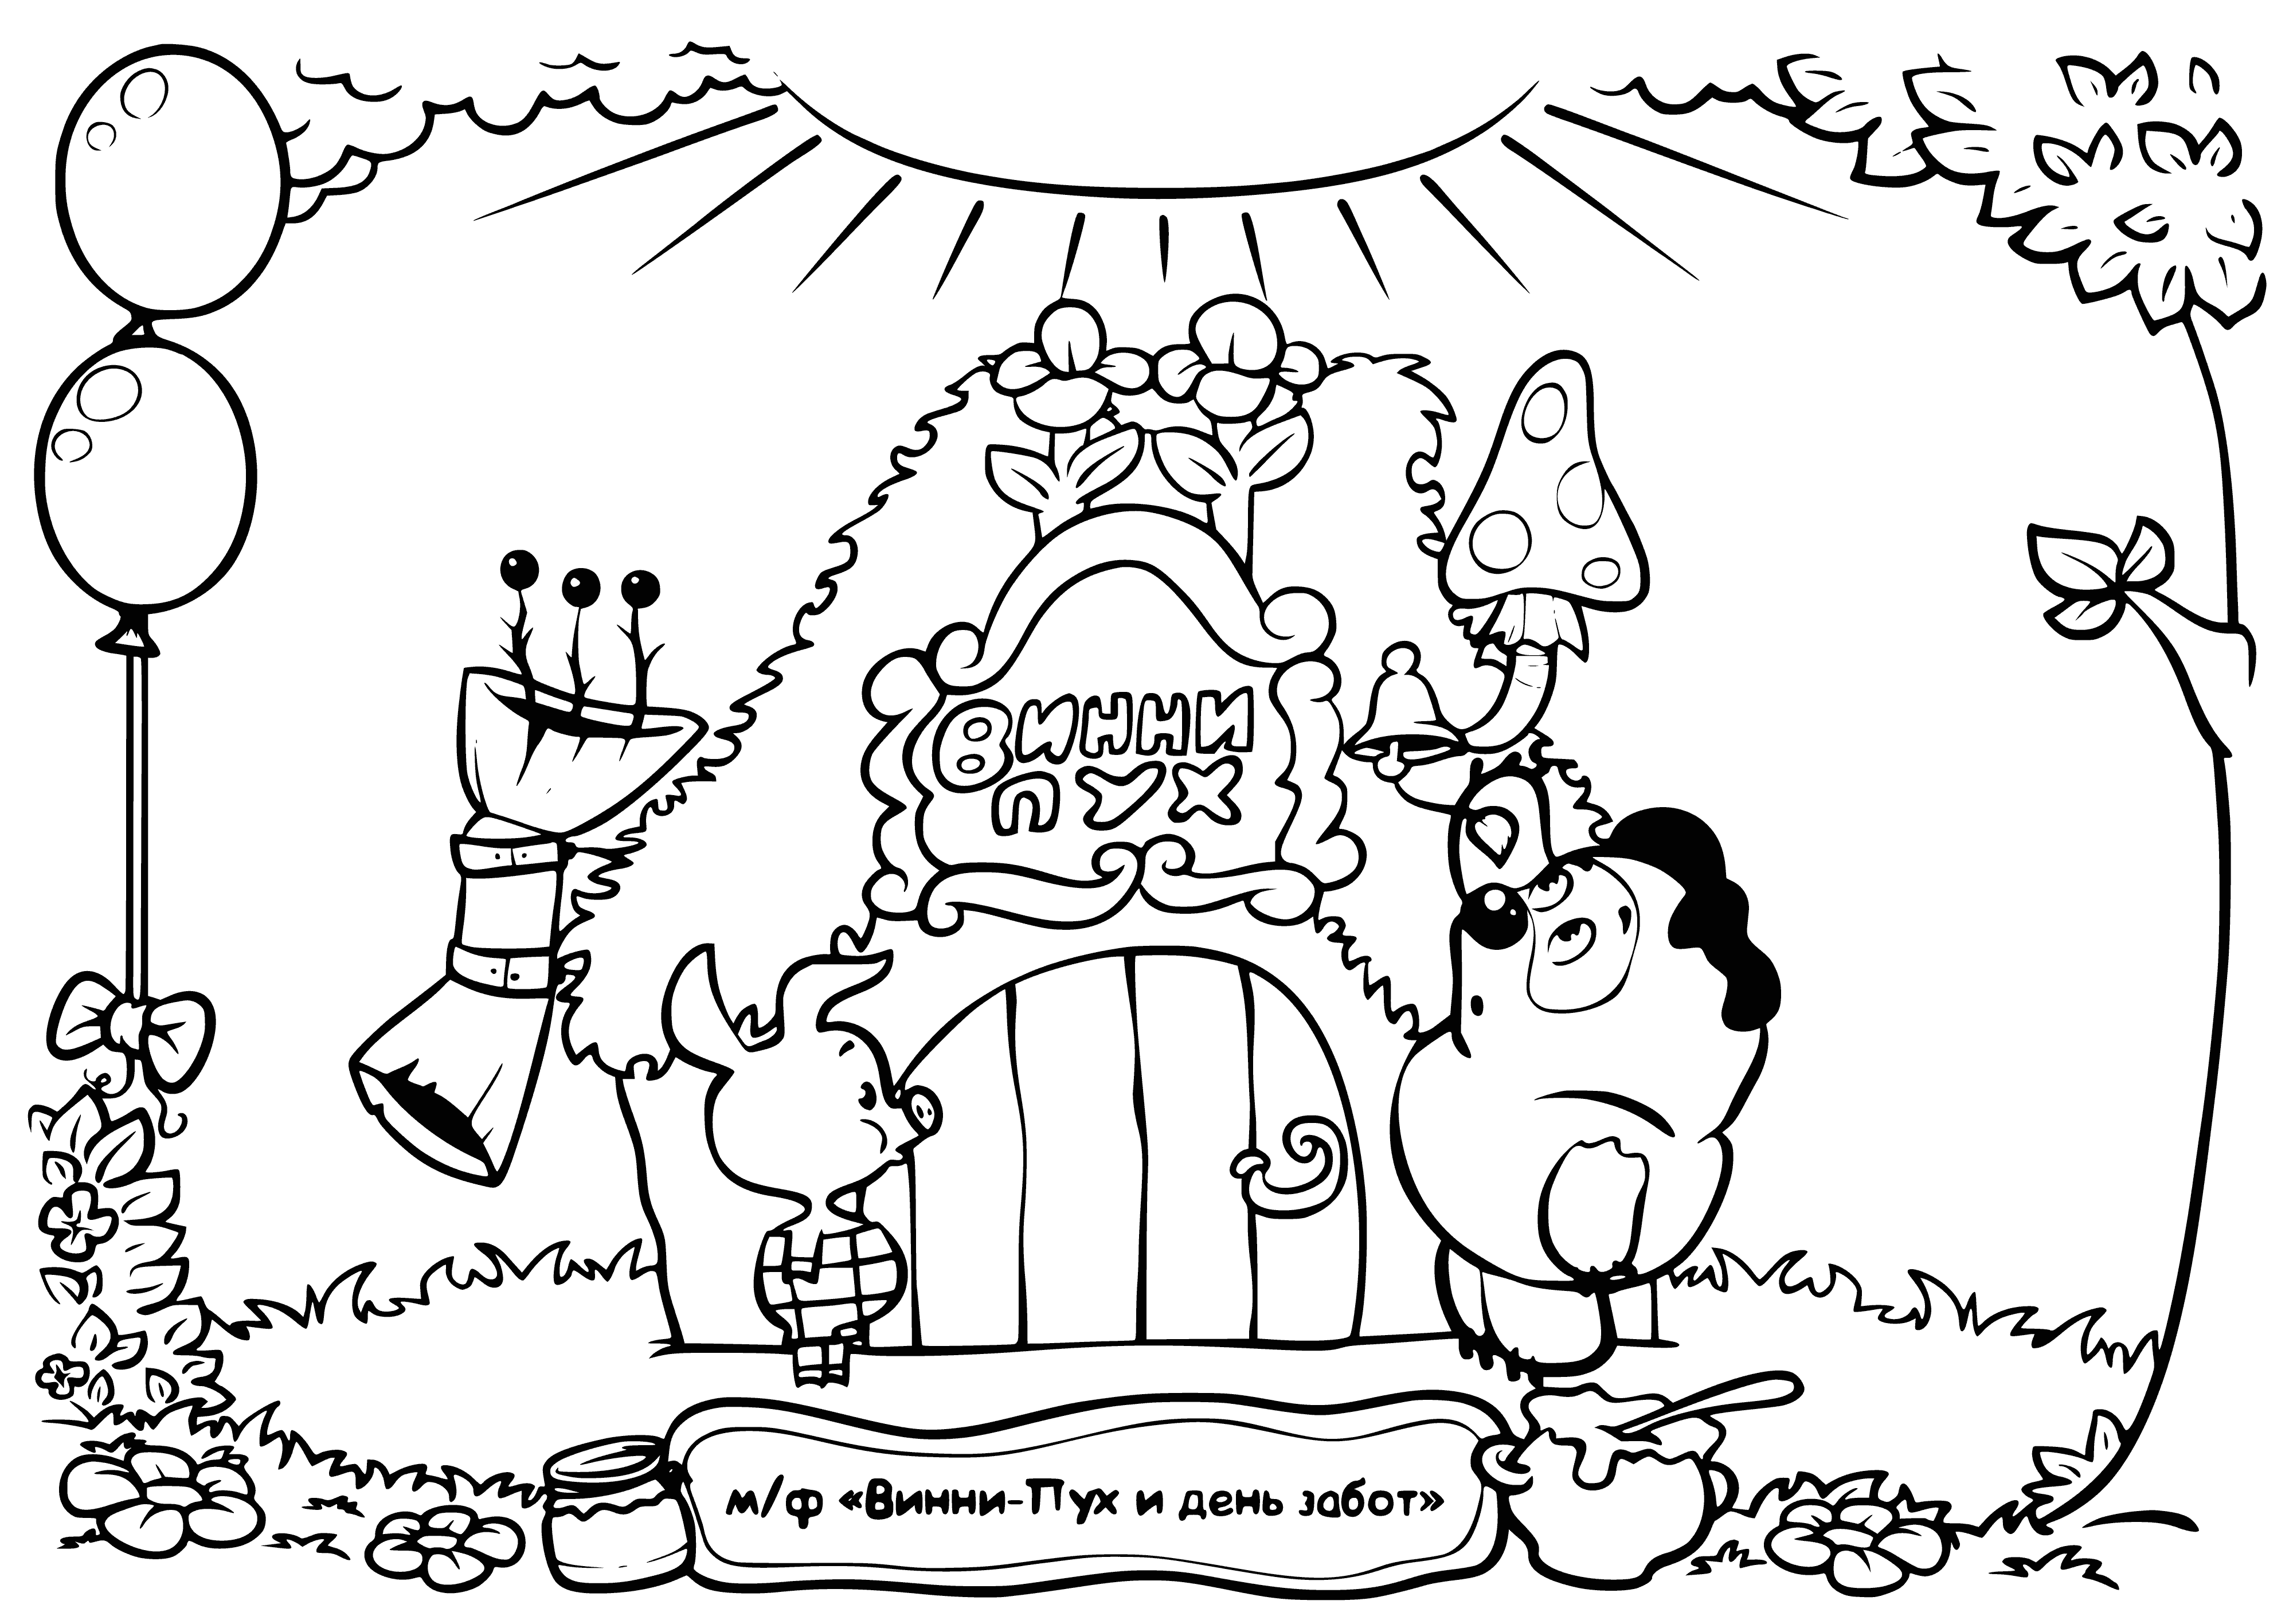 coloring page: The coloring page has a red house, tree w/swing, blueberry bush, stool w/blue pot, hill w/green field & yellow tree, and a circular green pond w/a blue & white duck.